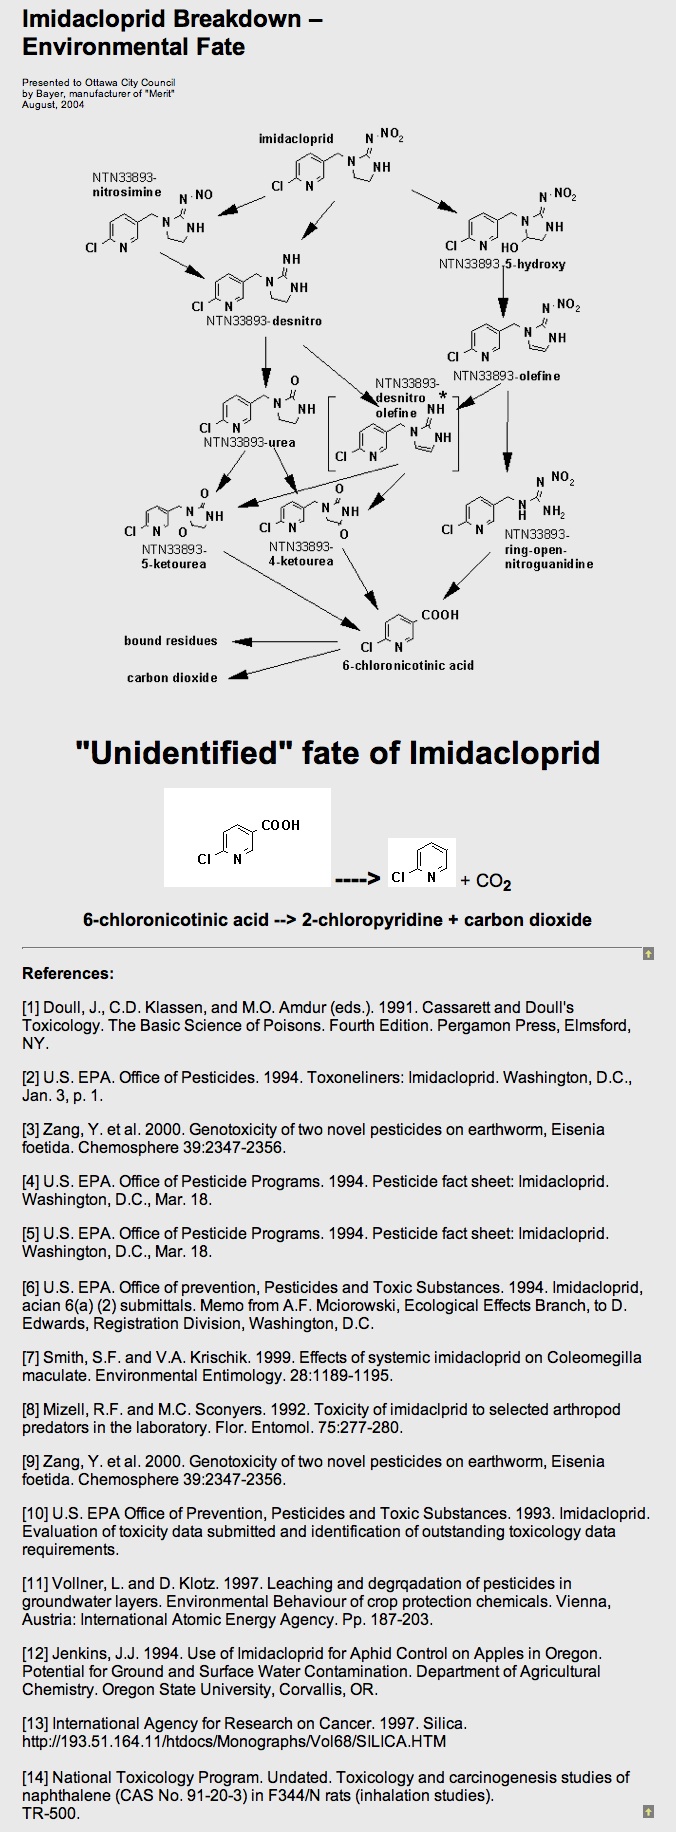 Graphic: Fate of Imidacloprid